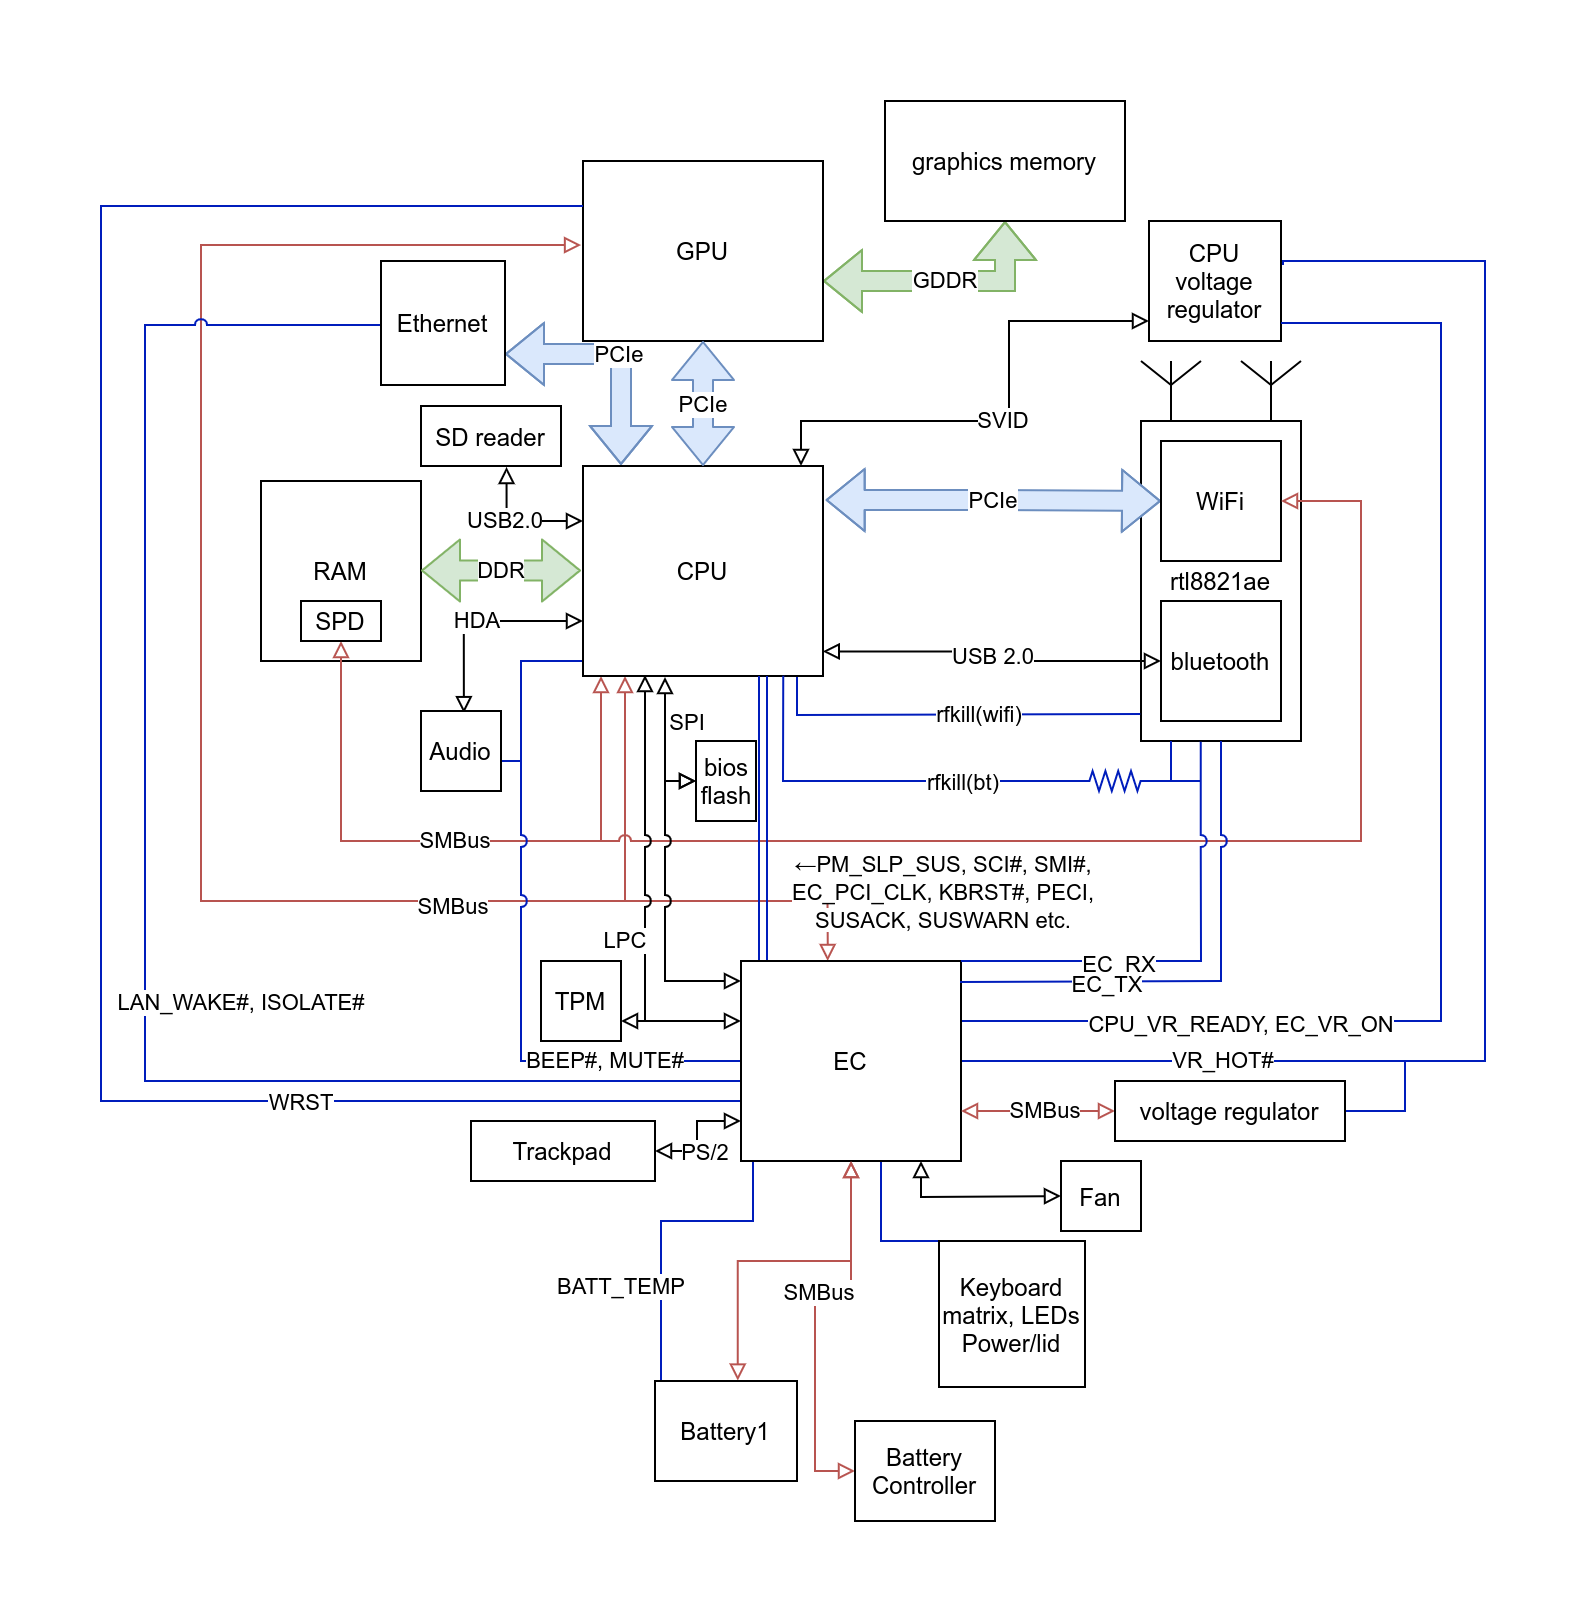 Diagram. There are components like the CPU, GPU, EC, voltage regulator etc. They are connected over a bunch of protocol, like SMBus, SPI, USB, PCIe or just normal traces without any protocols